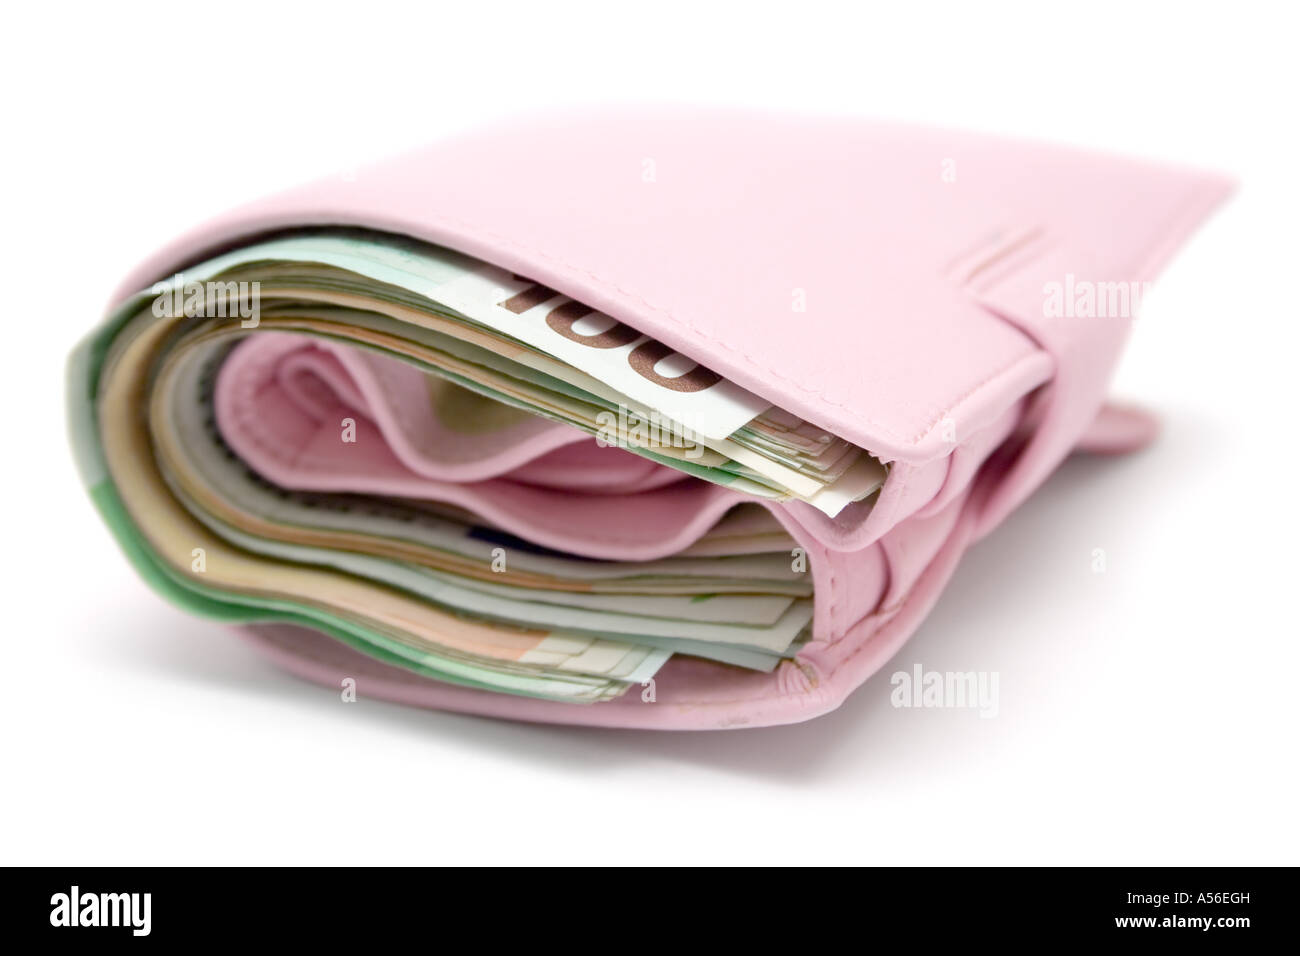 Purse Money Stock Photos and Images - 123RF